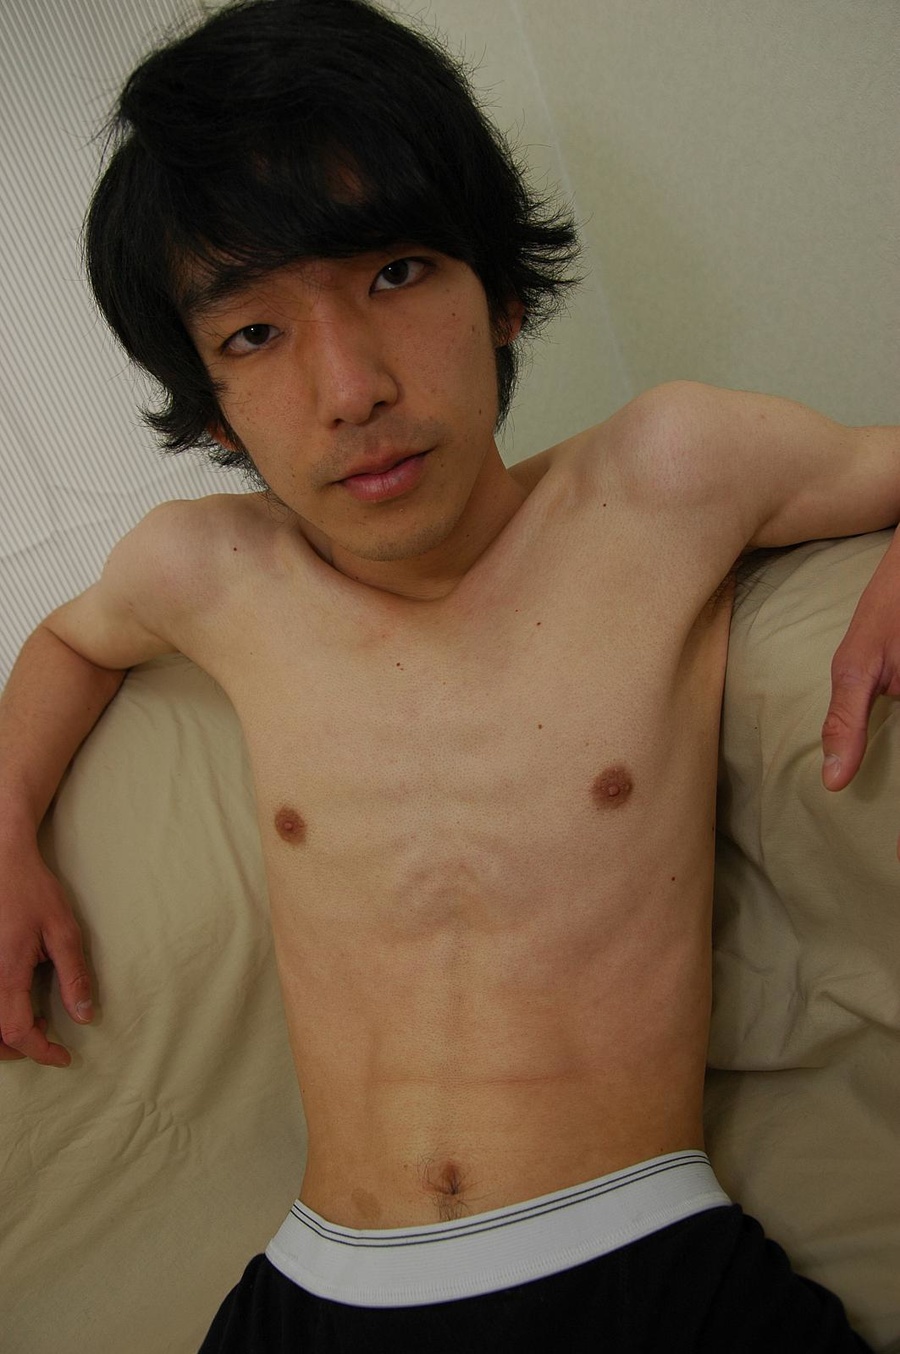 Asian handsome hunk undressing on a cam and - XXX Dessert - Picture 4